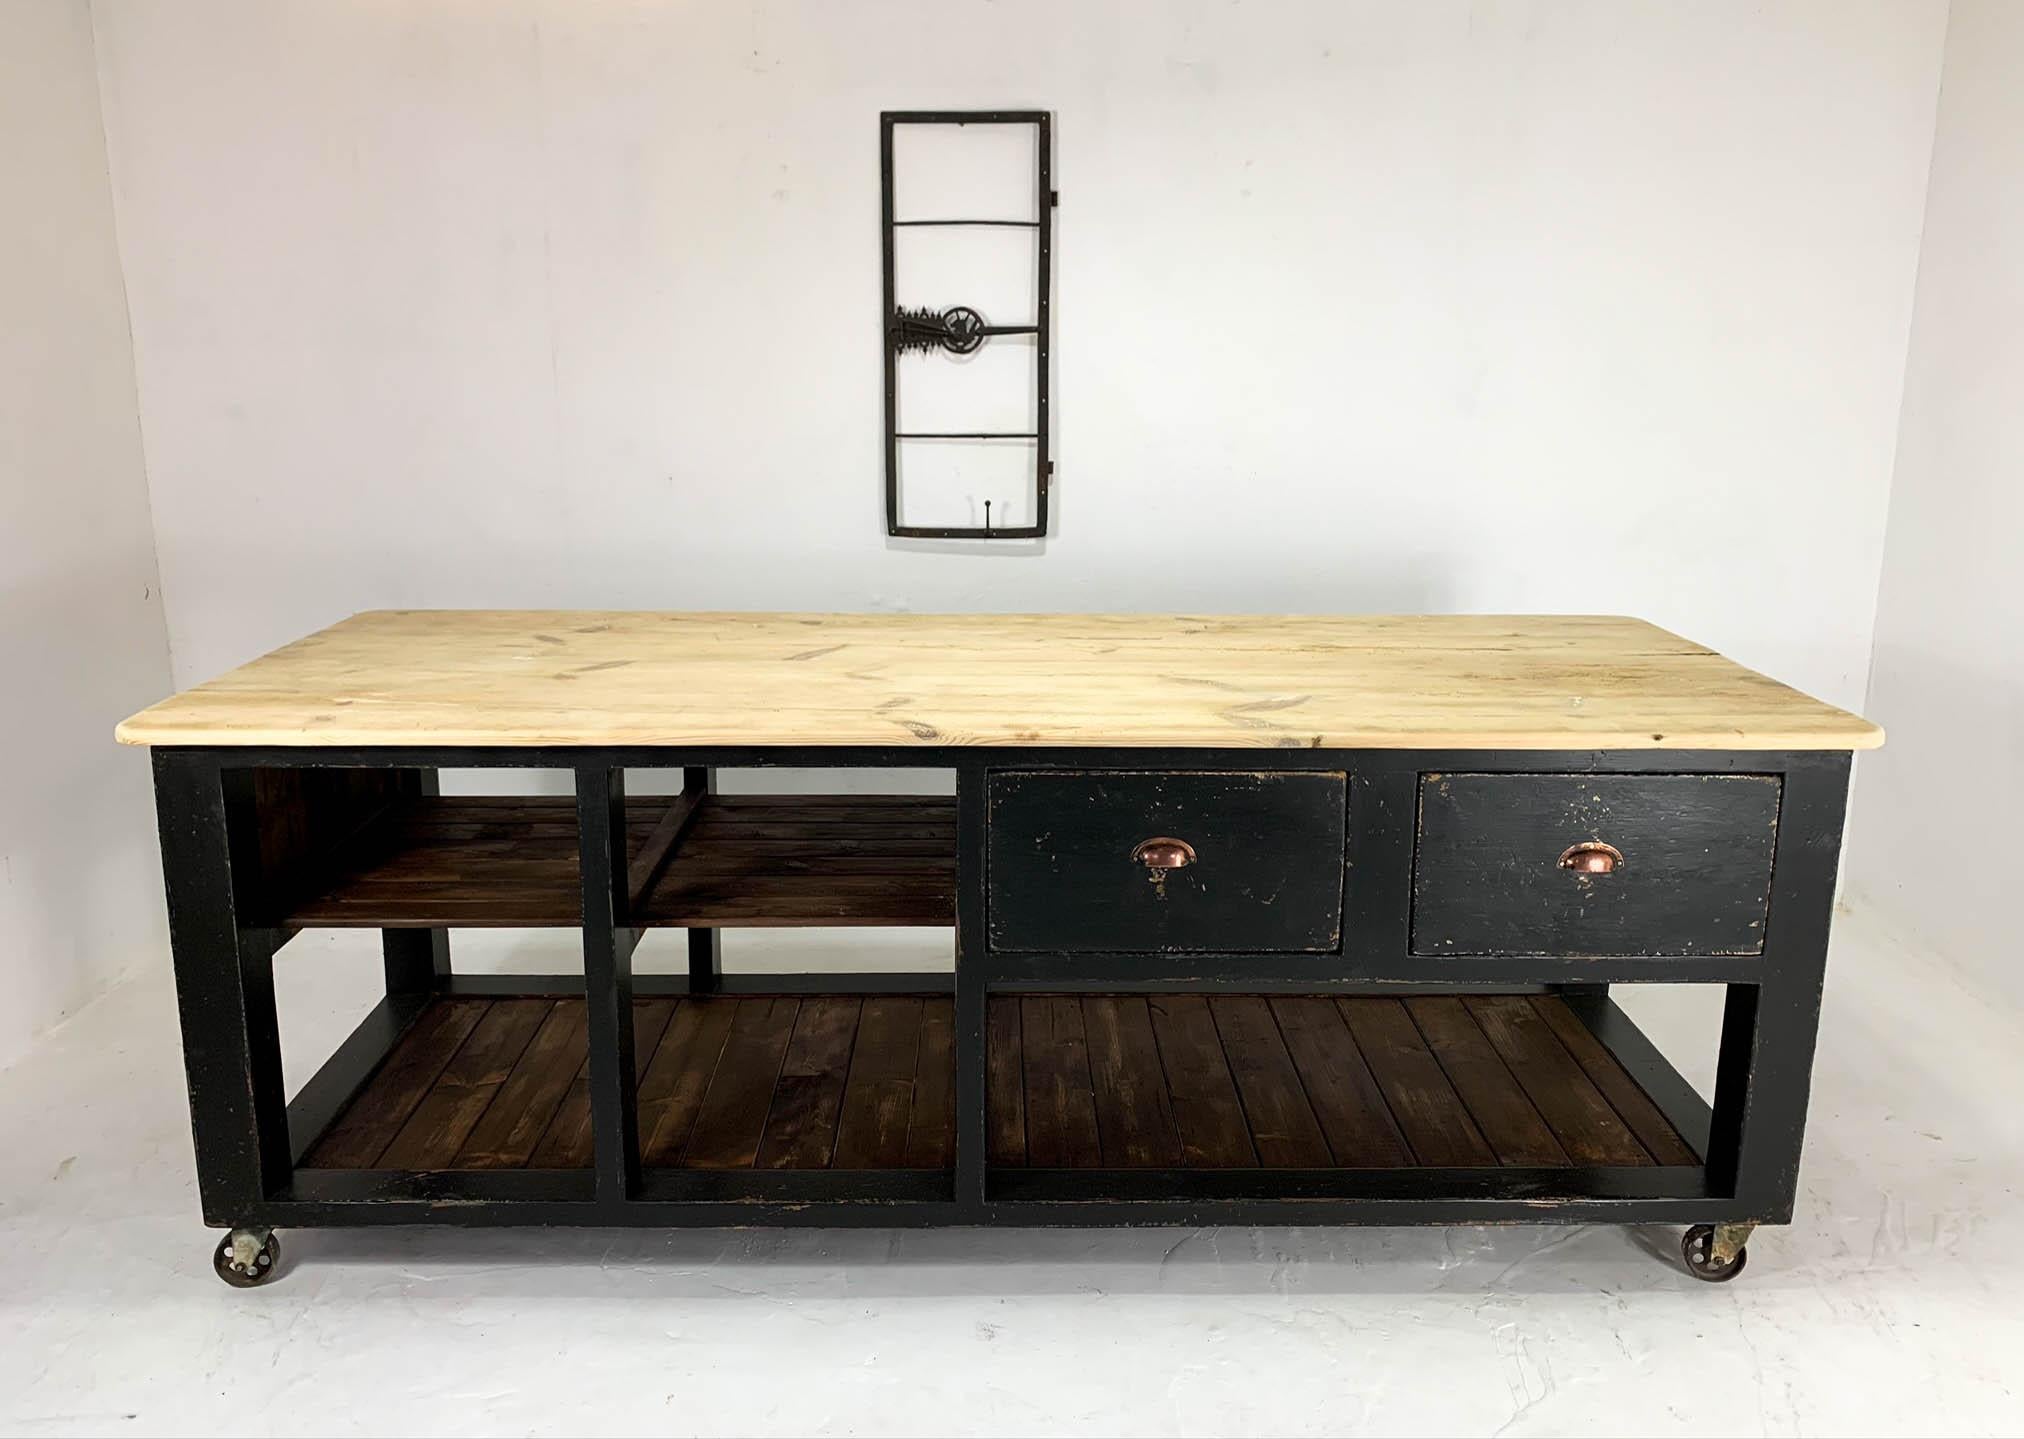 Authentic Baker's table made in England during the 1940s. Rescued from a barn in North Yorkshire and now fully restored to make a practical kitchen island or work table in the home, retail or restaurant setting.
It features two large drawers with